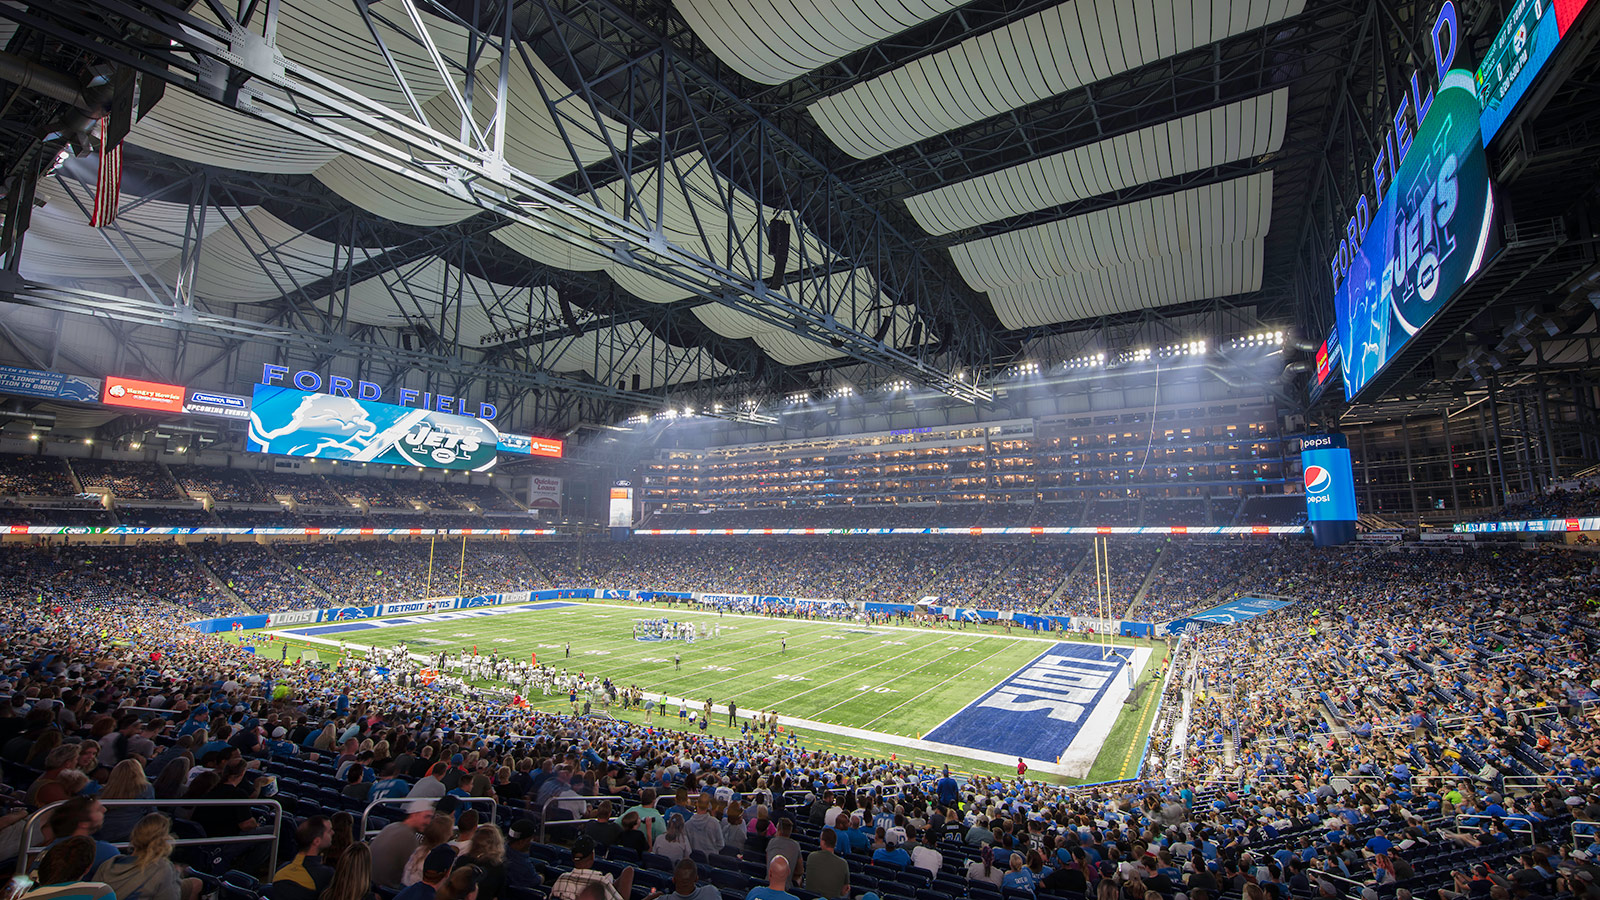 Detroit Lions Roar at Ford Field with Meyer Sound’s LEO Family